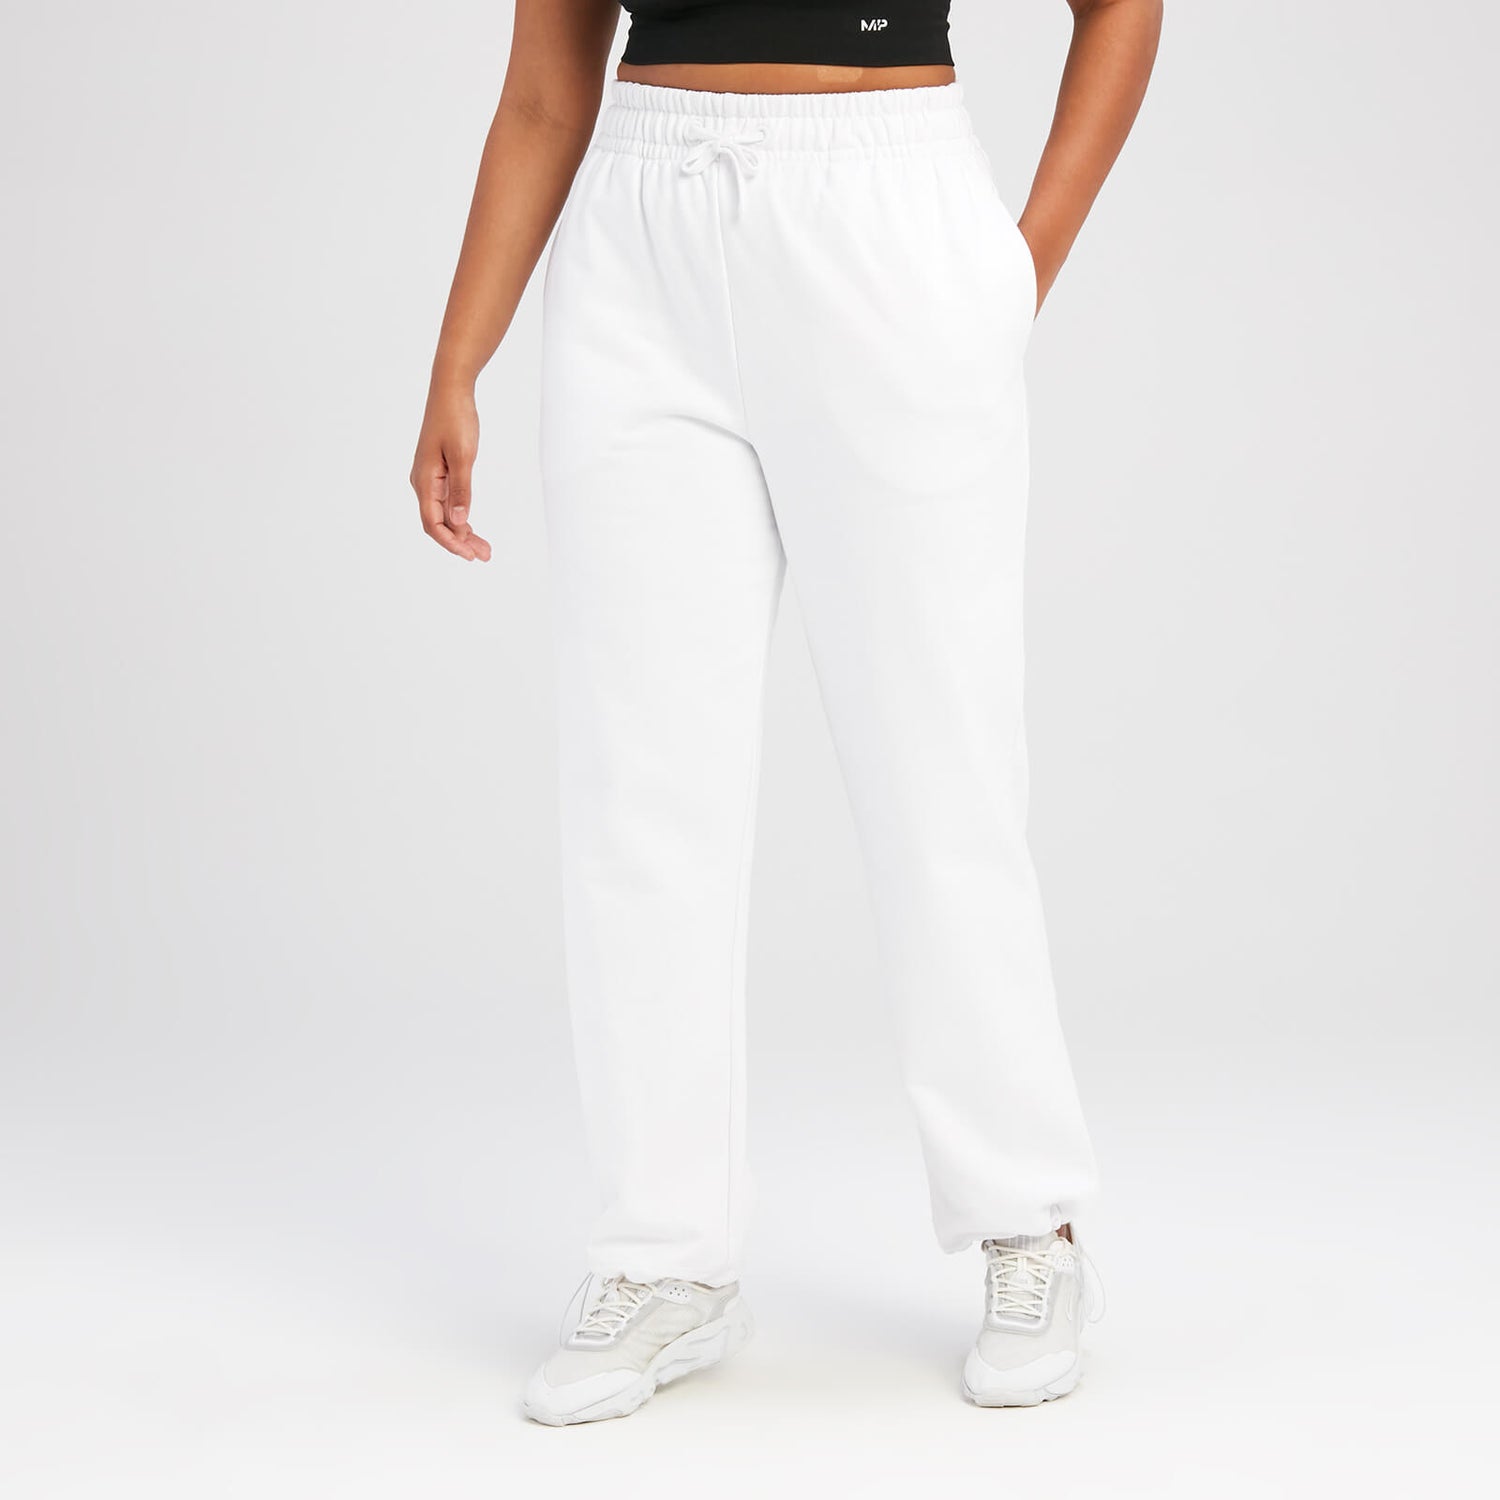 MP Women's Rest Day Joggers – White - S